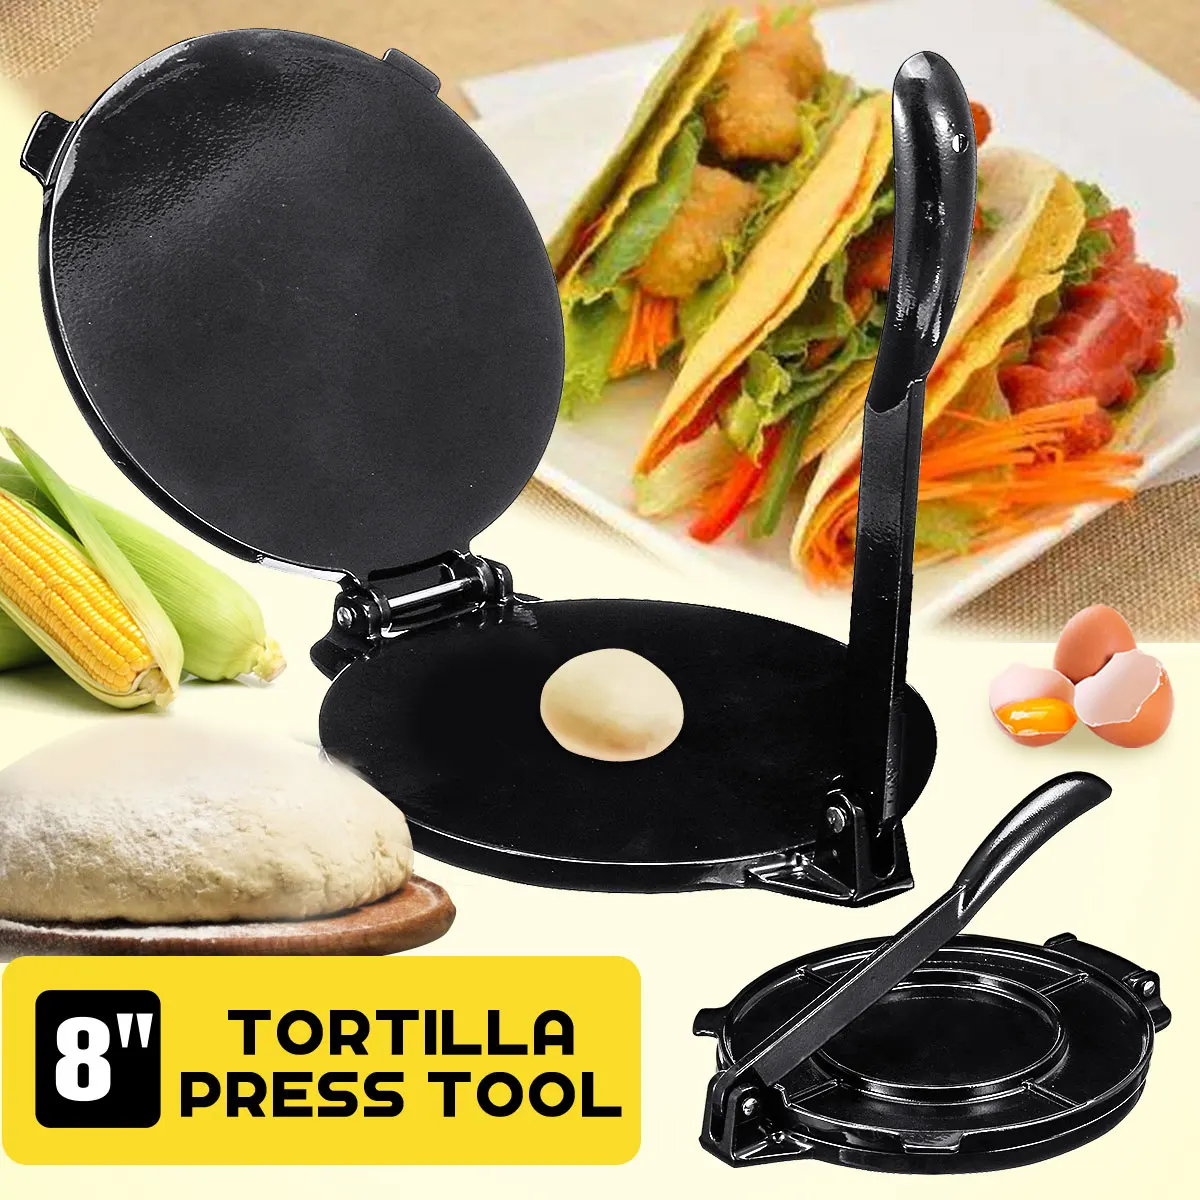 8 Inches Tortilla Press Maker Portable Gadgets Baking Tool Kitchen Accessories Heavy-Duty Tortilla Press Maker with Foldable Handle 